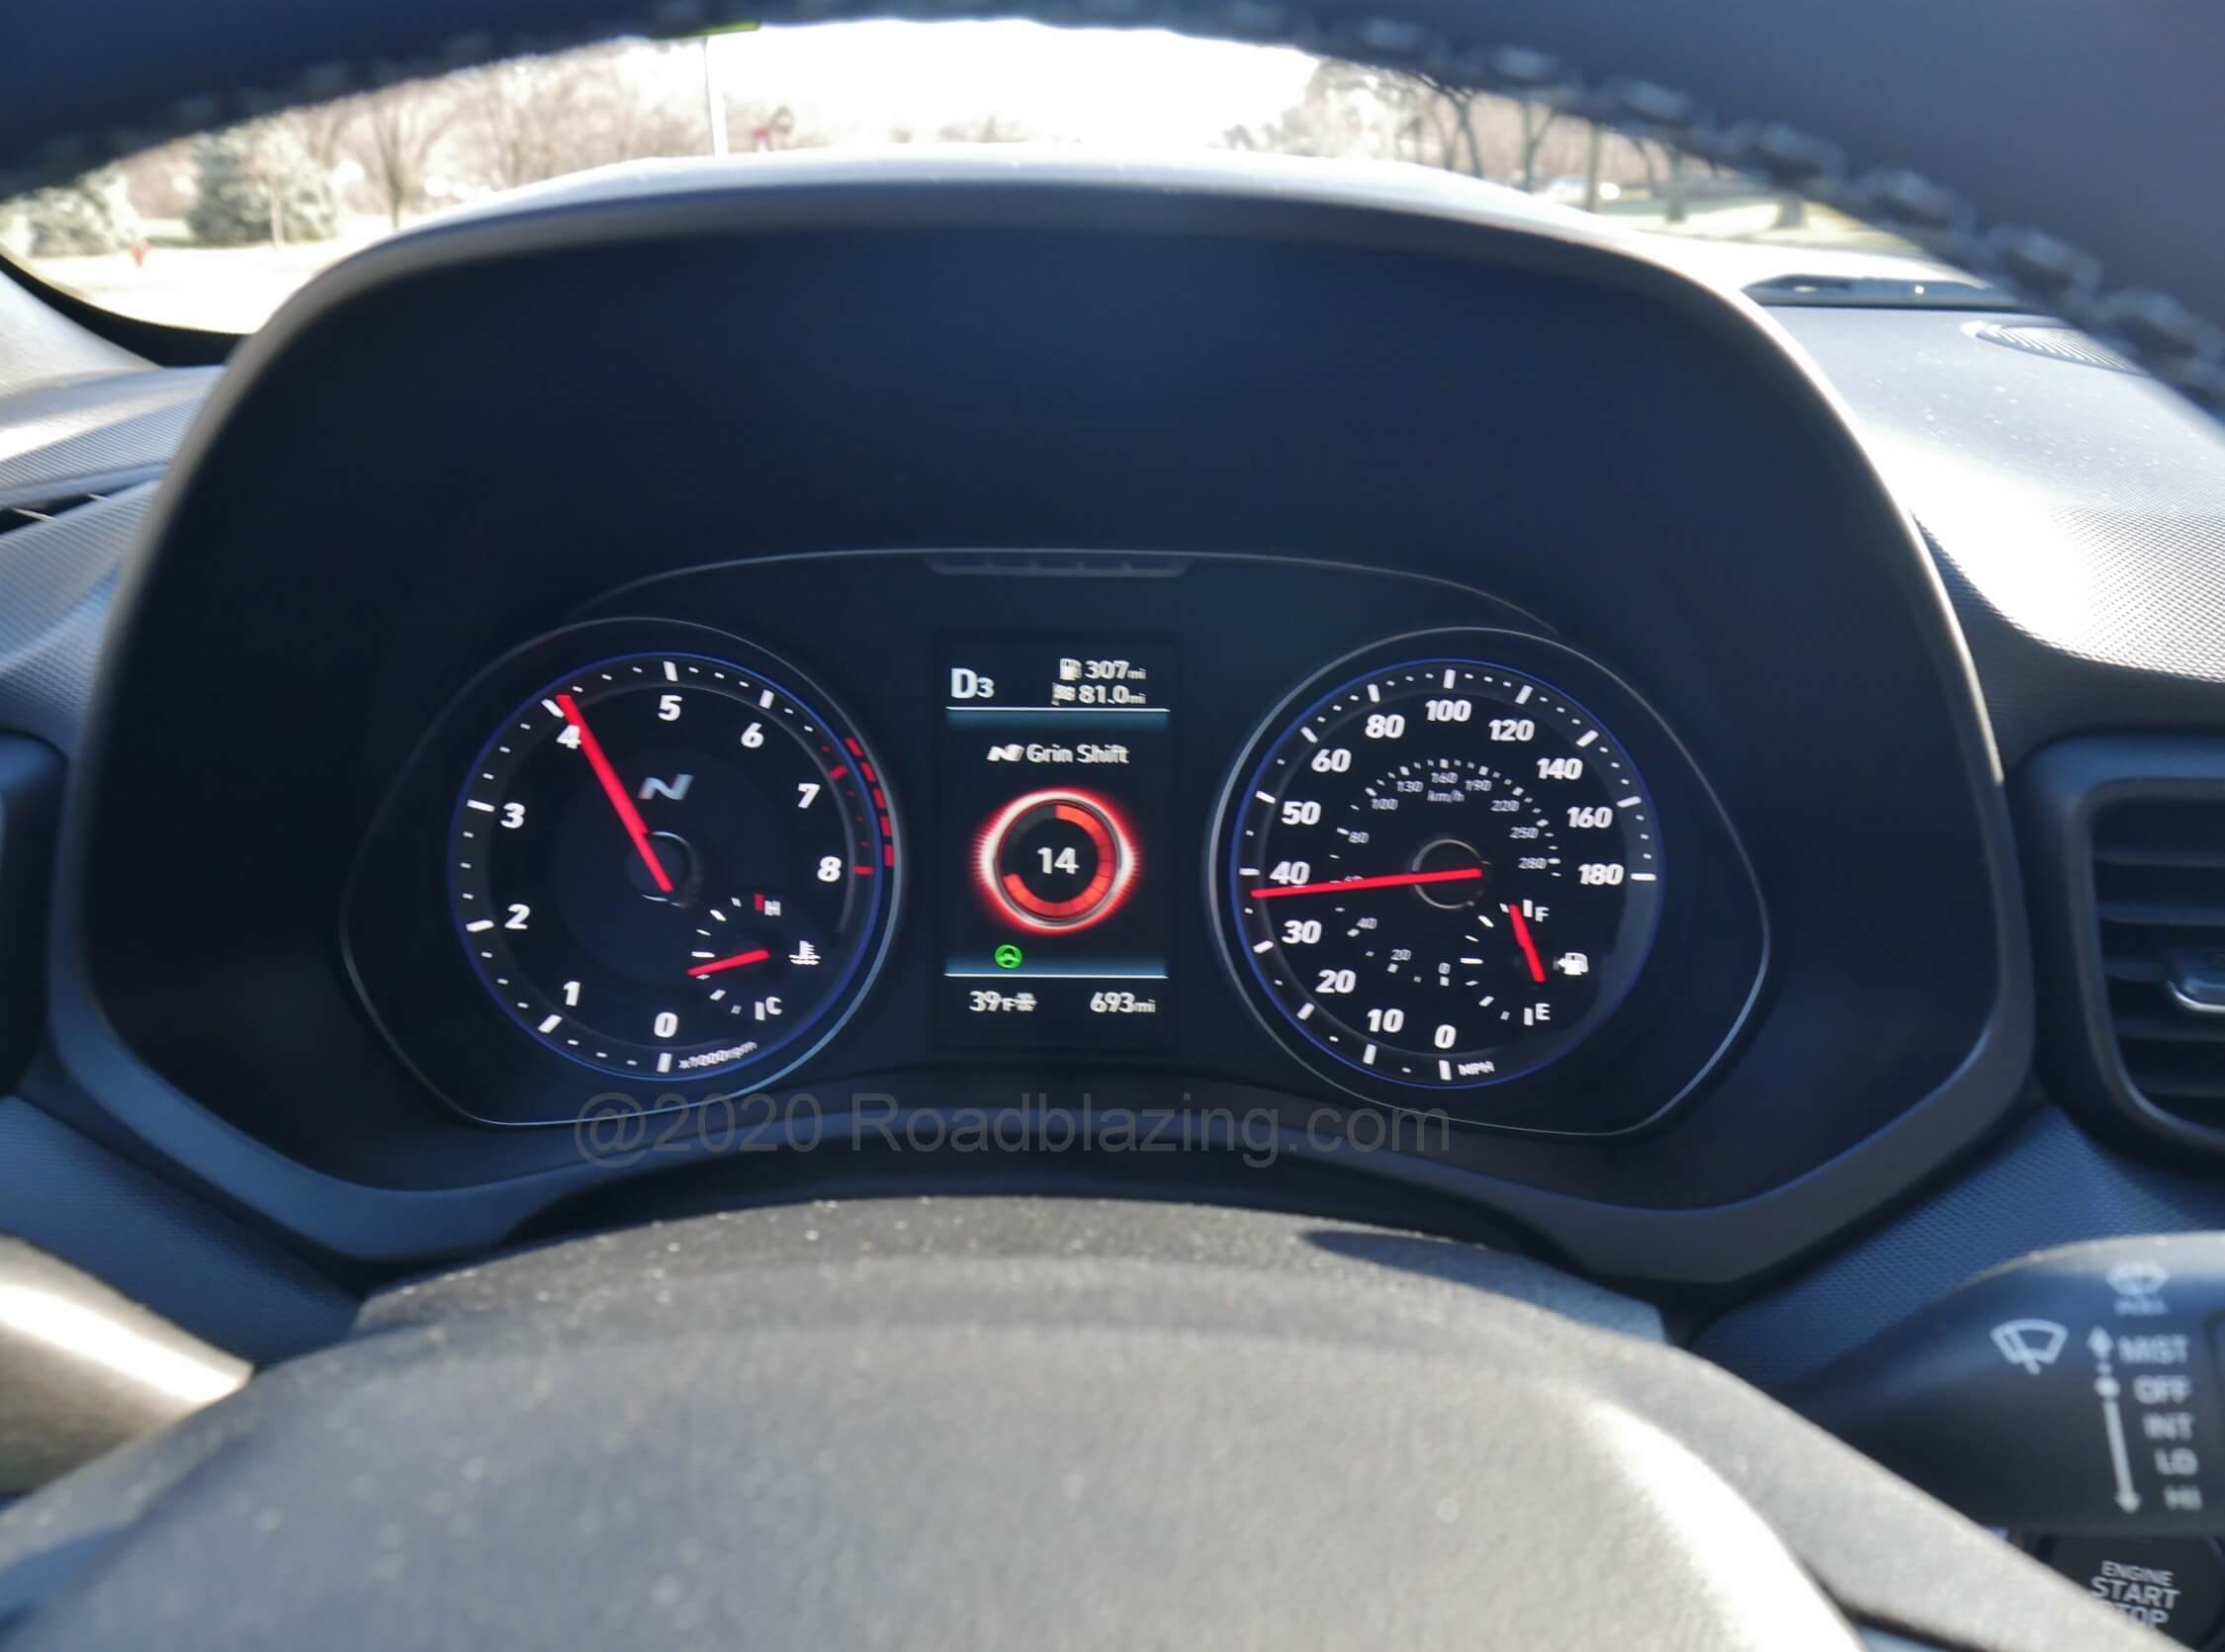 2021 Hyundai Veloster N DCT: turbo overboost Grin Shift mode displays in a traditional dual analog gauge array MFD